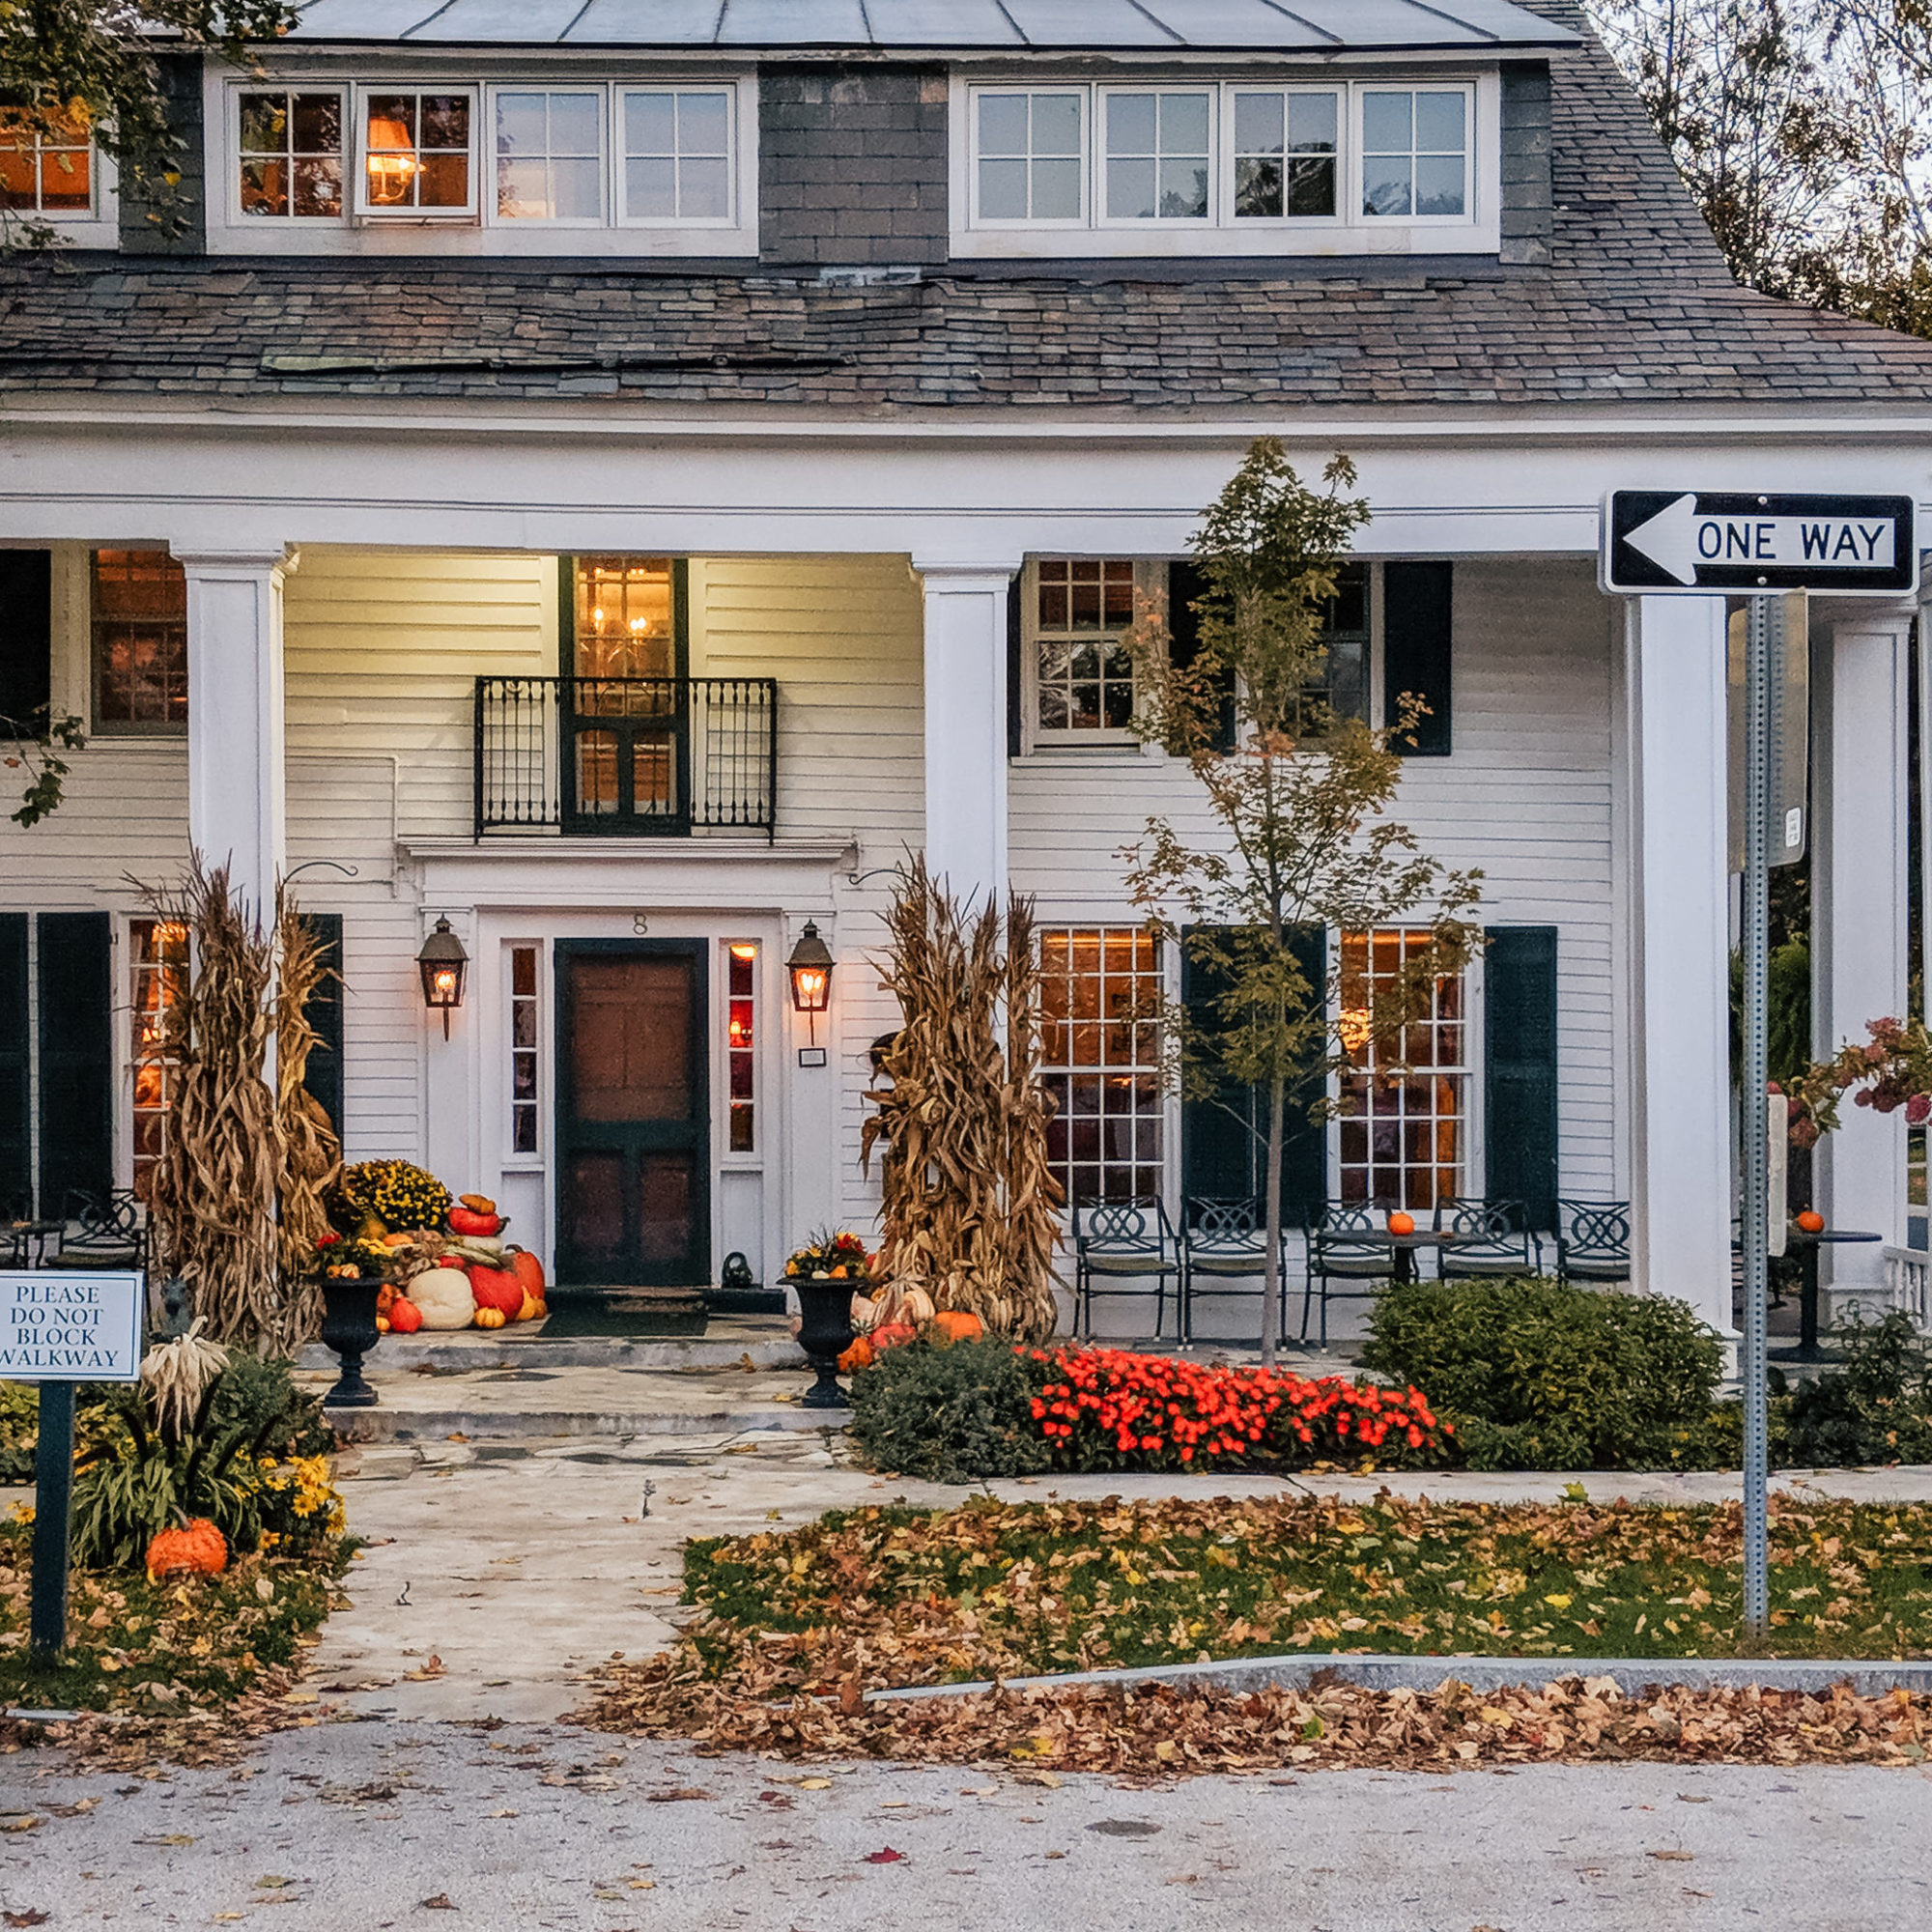 Why Book a Romantic Fall Getaway in New England Shannon